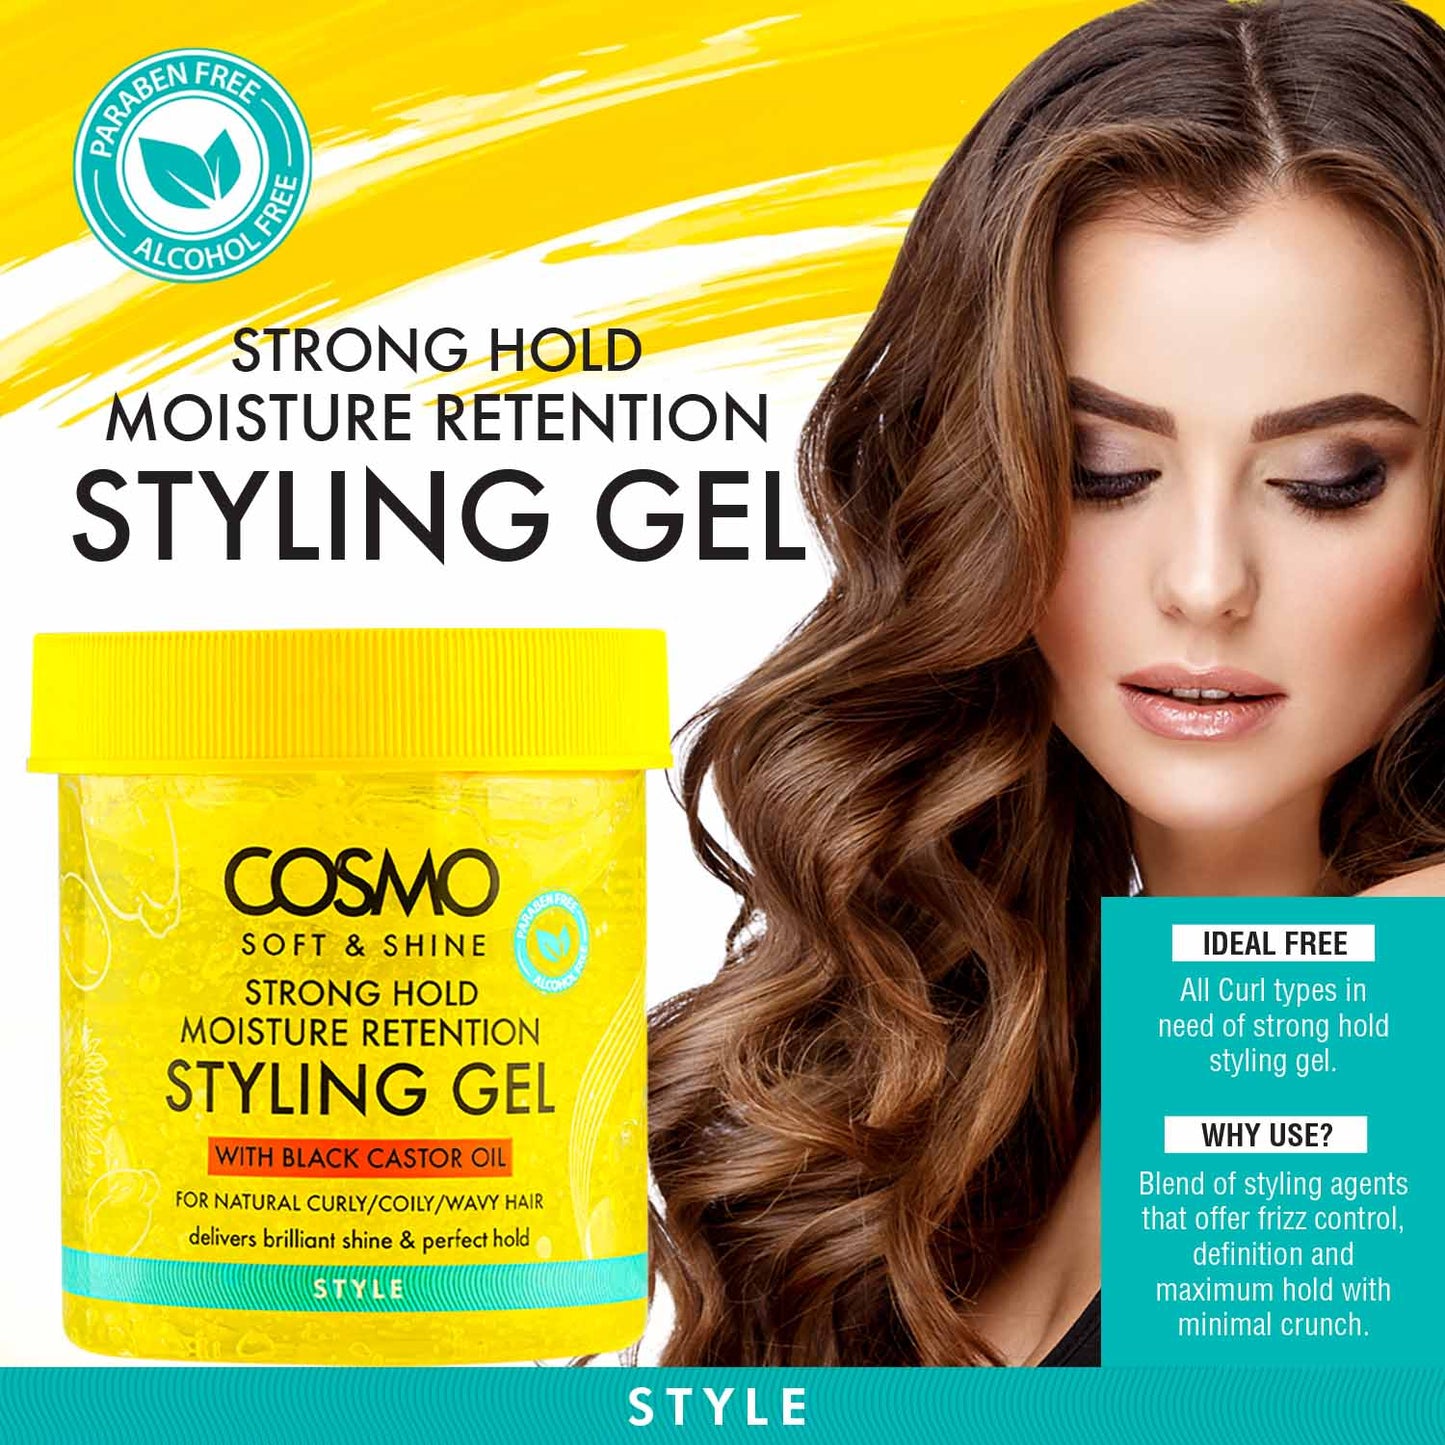 COSMO SOFT & SHINE STRONG HOLD STYLING GEL - 450G